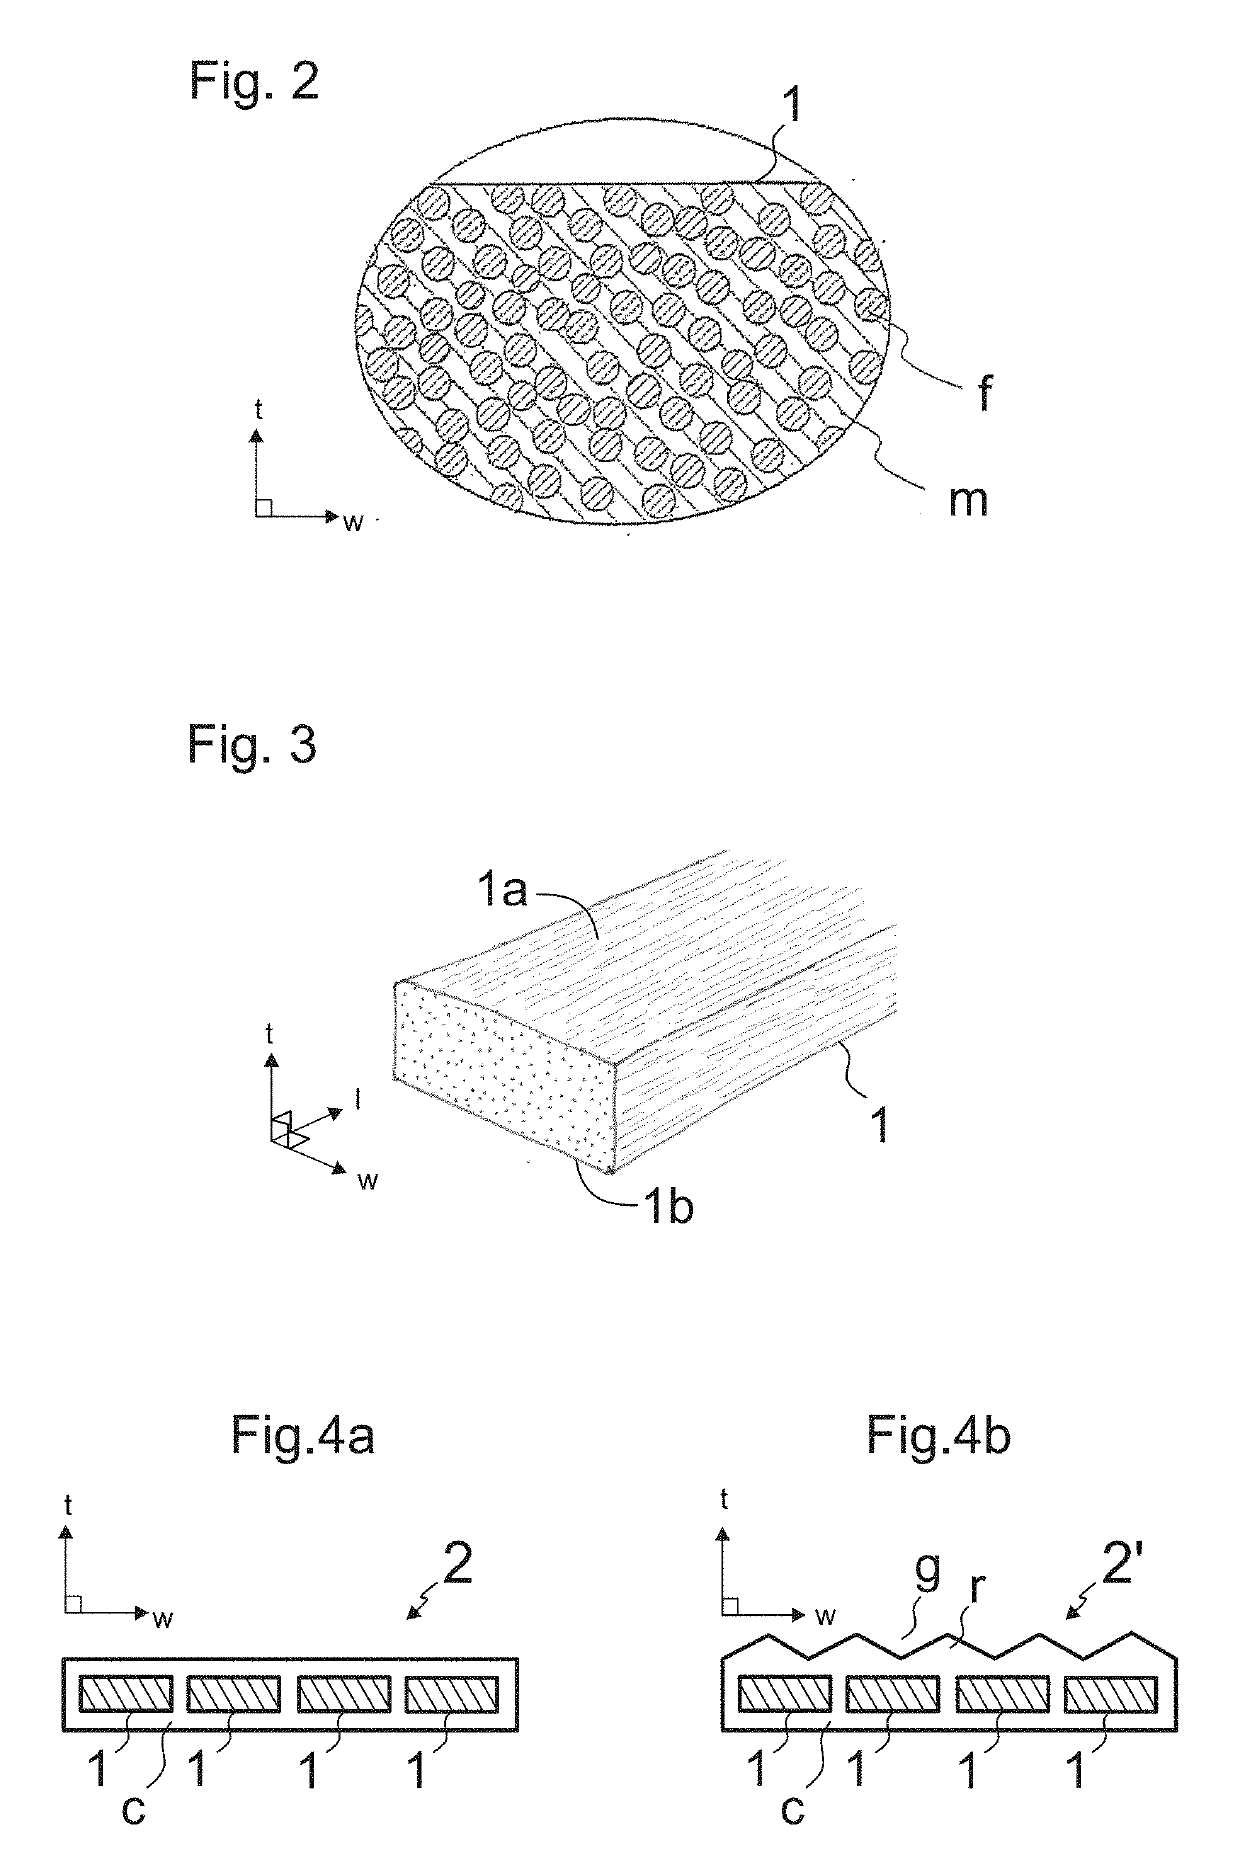 Method for checking the integrity of composite load bearing member